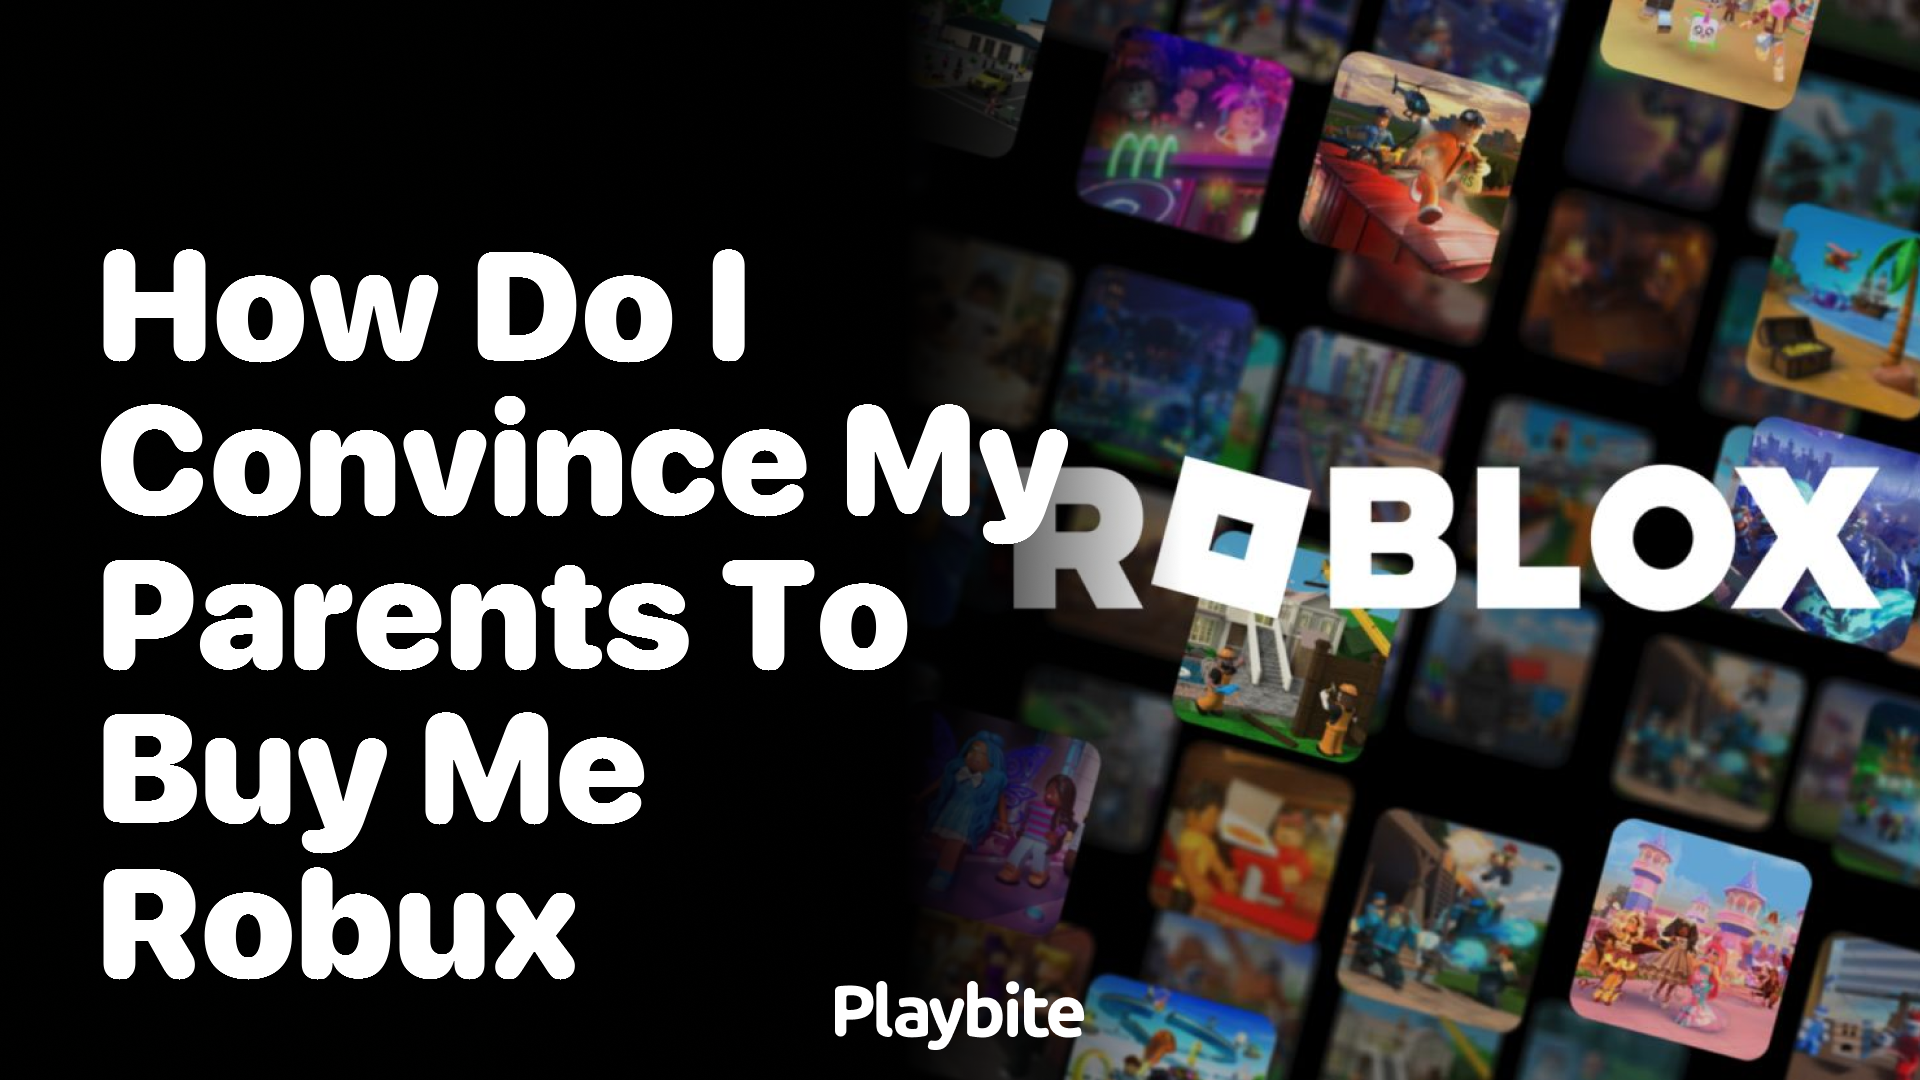 How Do I Convince My Parents to Buy Me Robux?